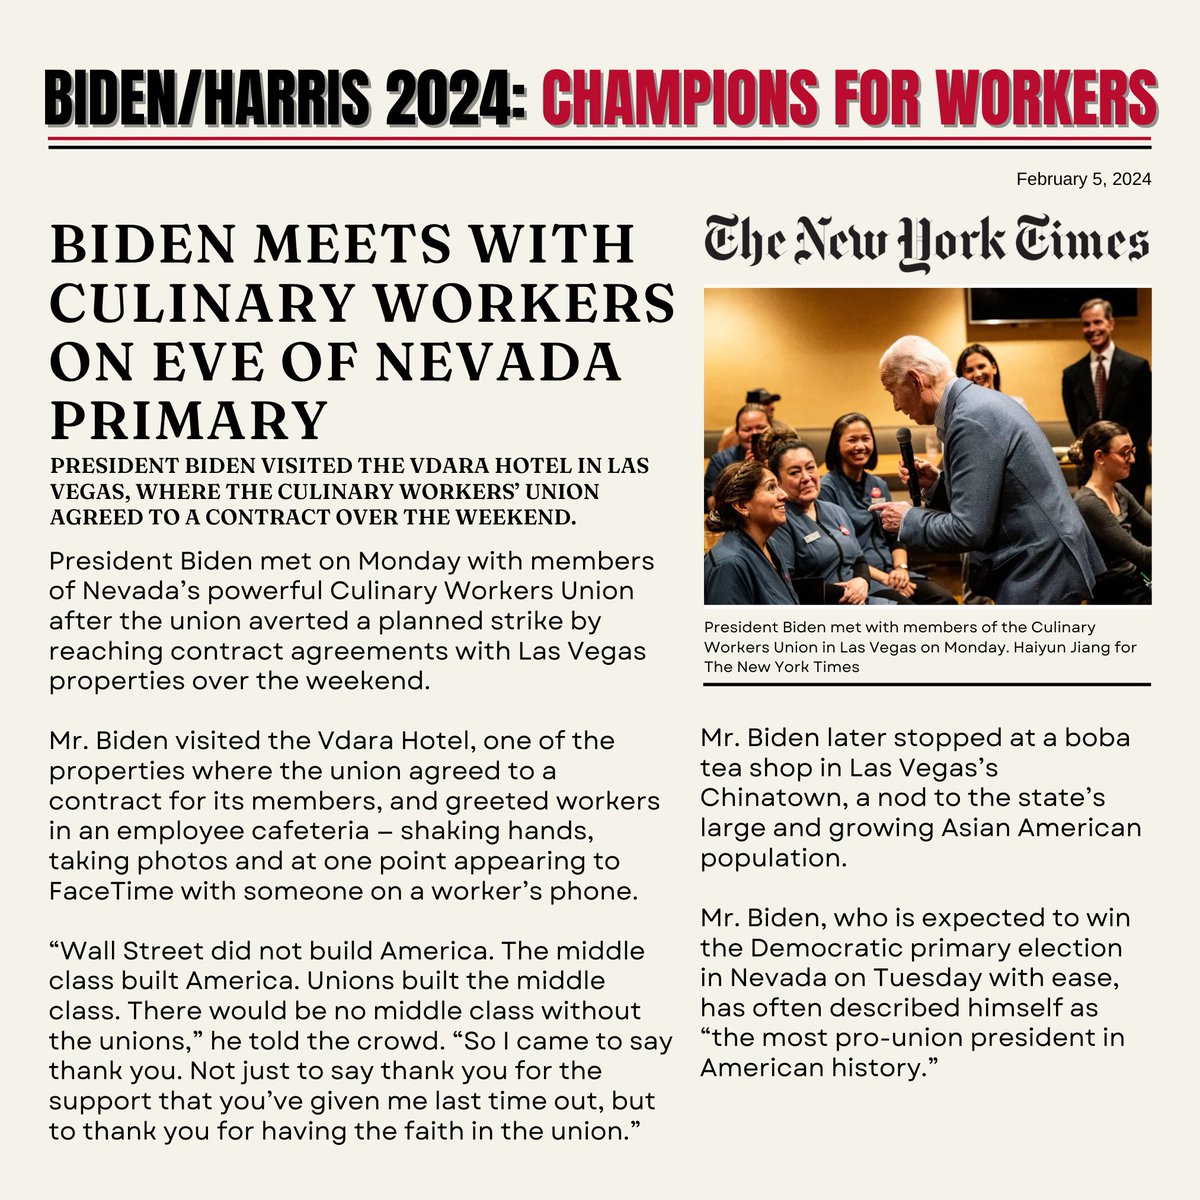 With @POTUS Biden & @VP Harris in office, workers know we've got backup & political leadership who value working families & that's just a big deal for workers. nytimes.com/2024/02/05/us/…